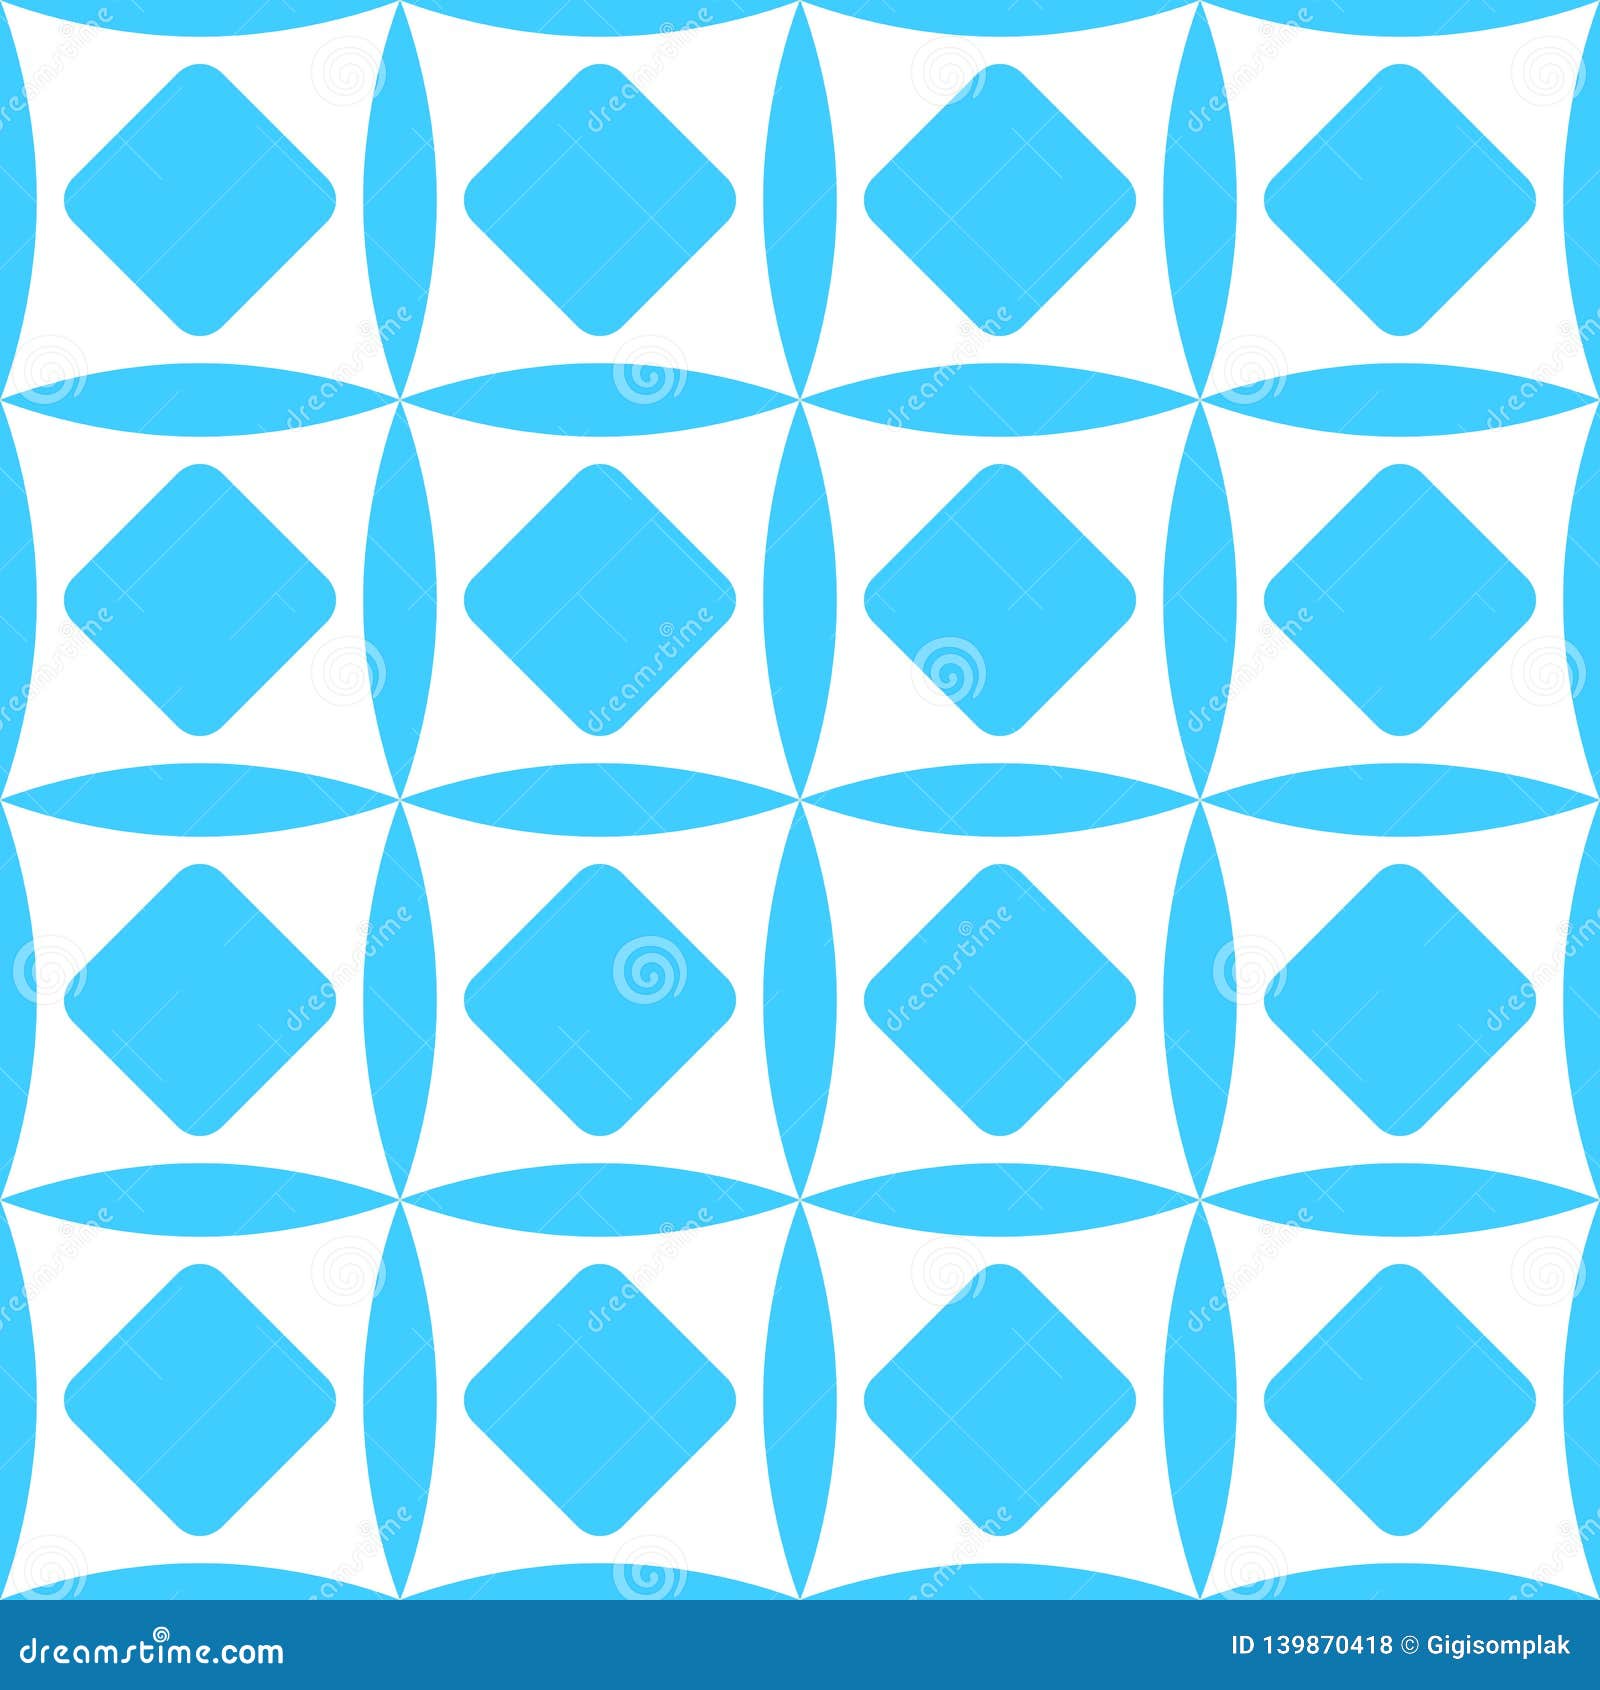 simple  seamless pattern, blue elipse and rounded corner squarefor background, banner wrapping paper etc